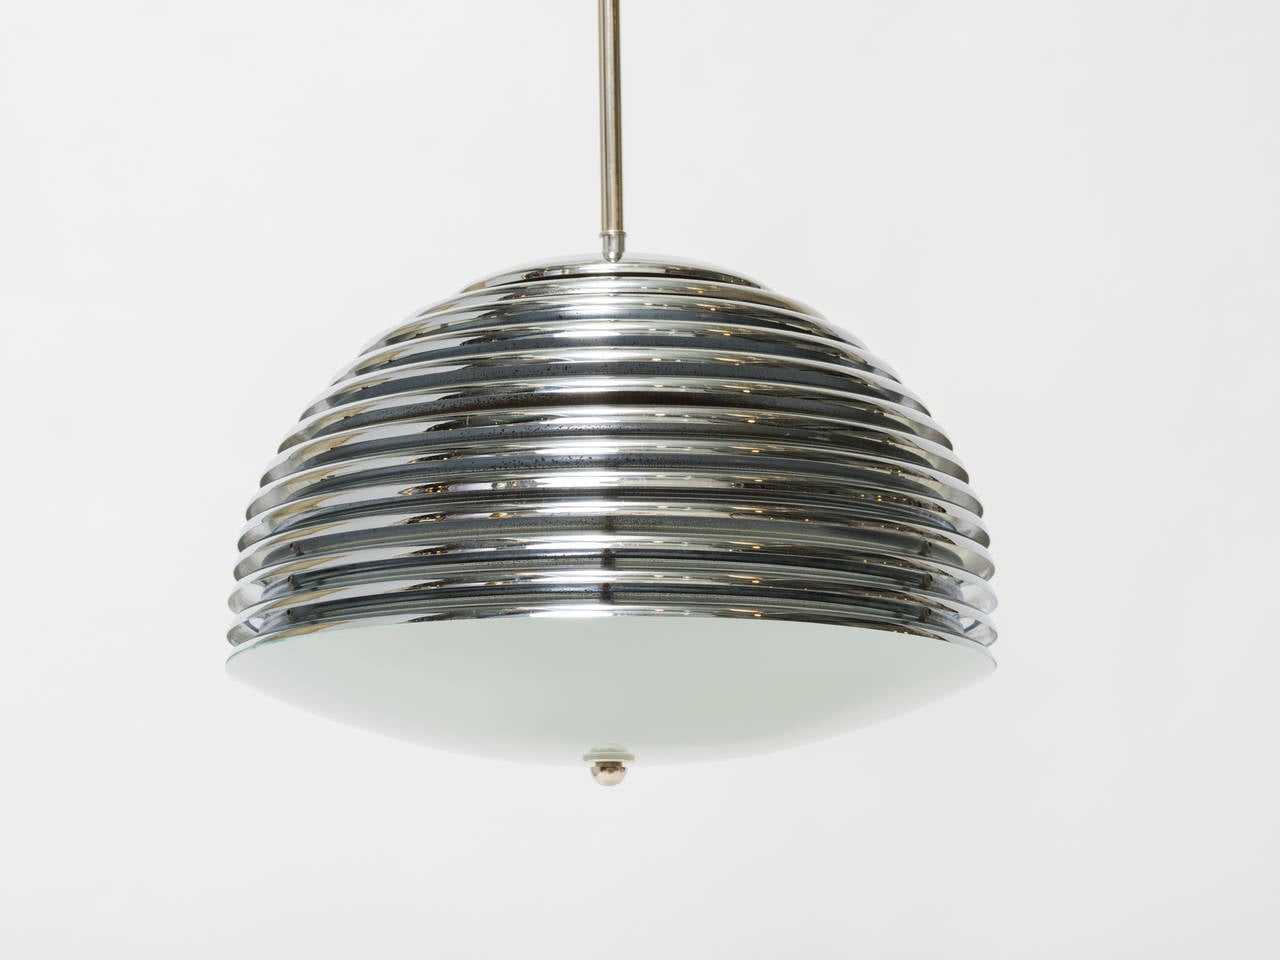 Nickel-plated pendant light composed of overlaid metal disks with frosted convex glass bottom.
Chandelier has been professionally restored and rewired.
Capacity: Three E26 Max 100 watts per socket.